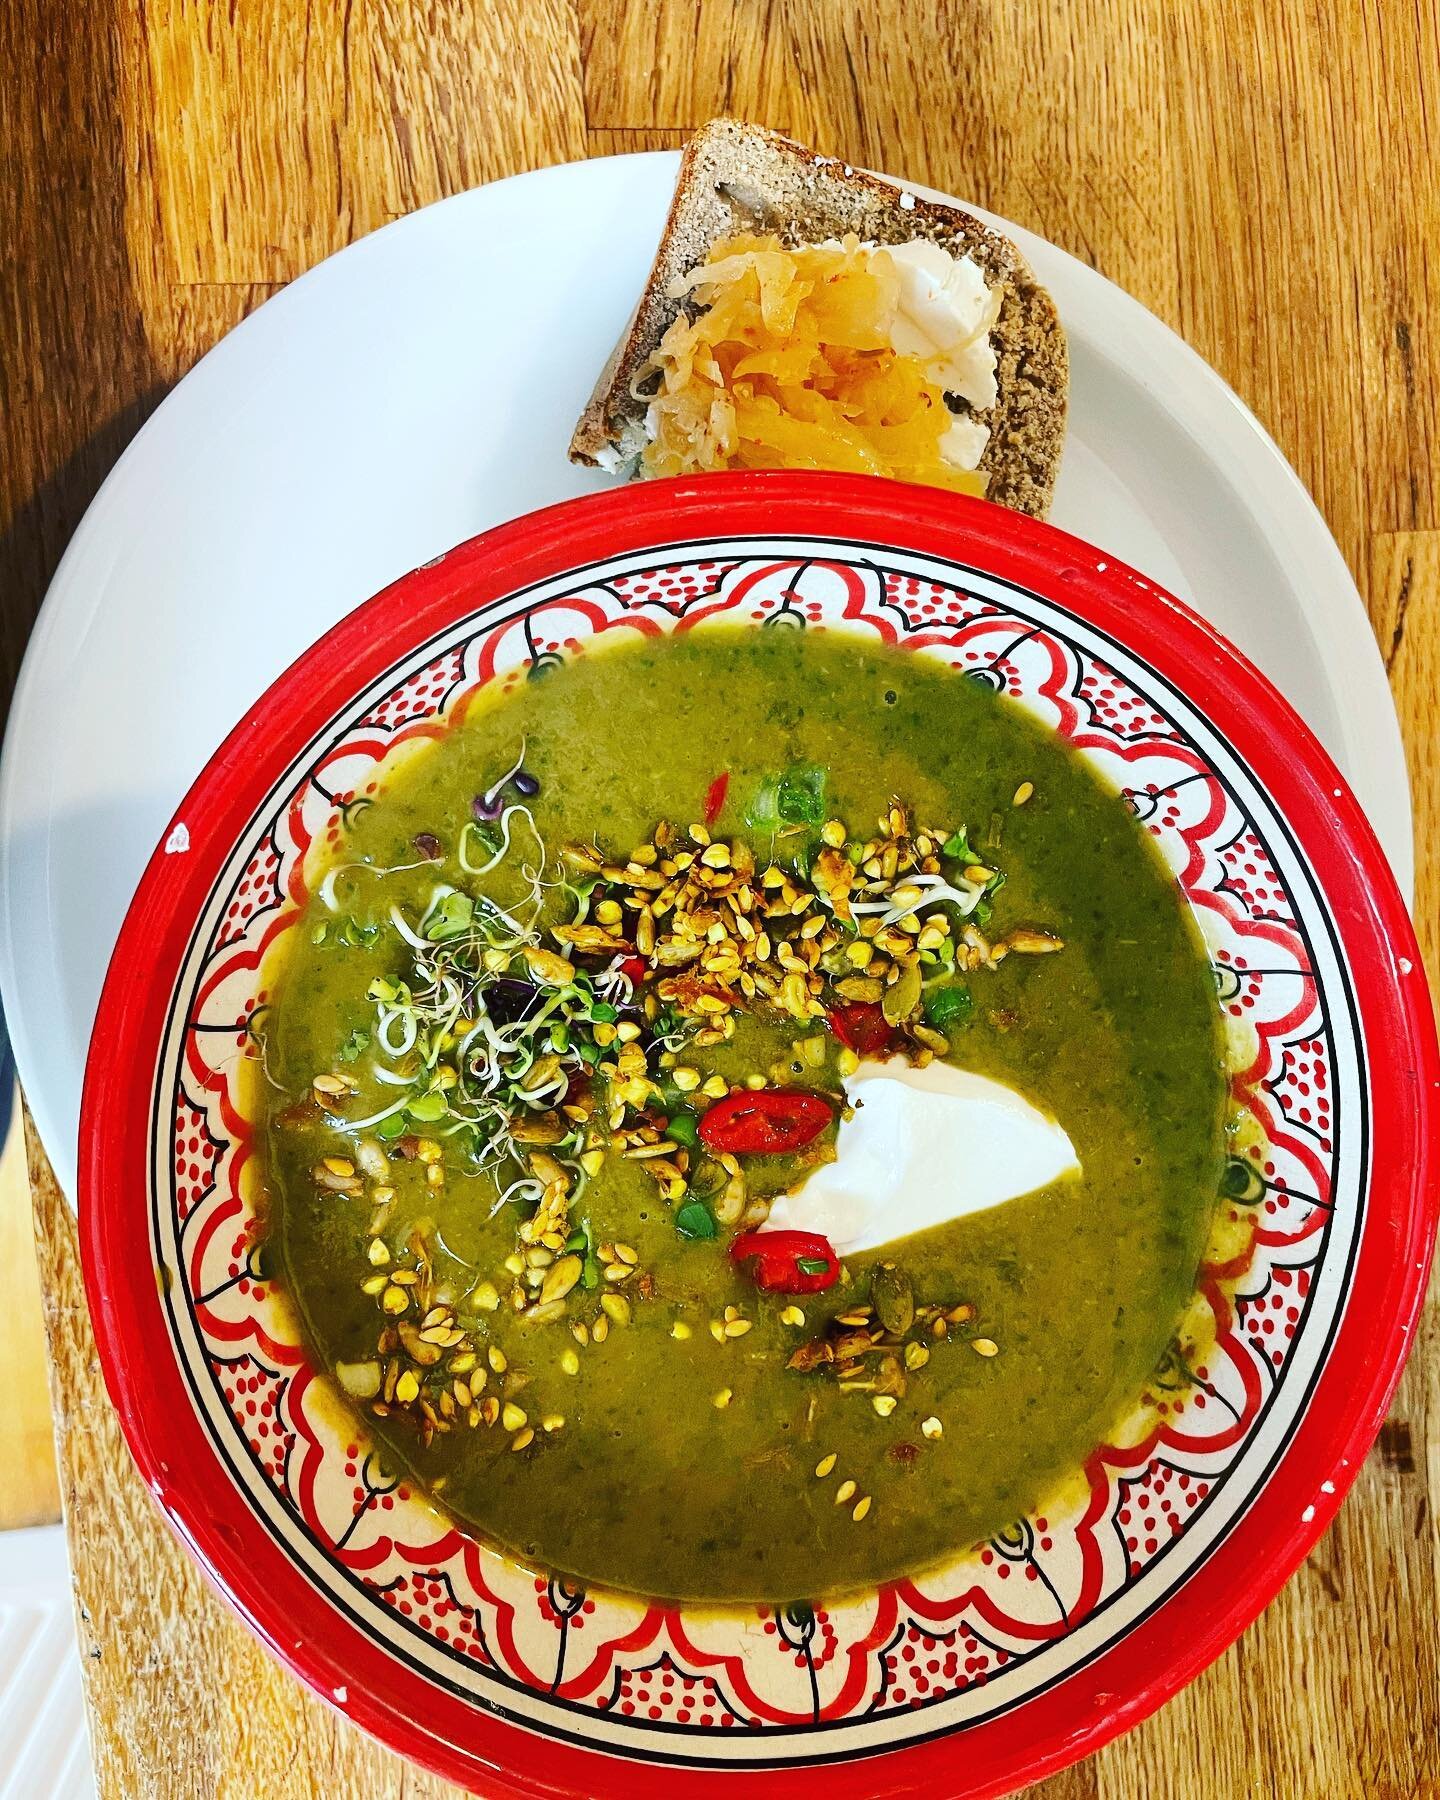 Sunday soup&hellip;

Today we are nesting as my eldest has an earache. This delicious green soup was inspired by @gemswholesomekitchen green noisily soup - always a winner ❤️ 
I added some @youjuicecleanse probiotic seeds, and also some @savvykraut_u